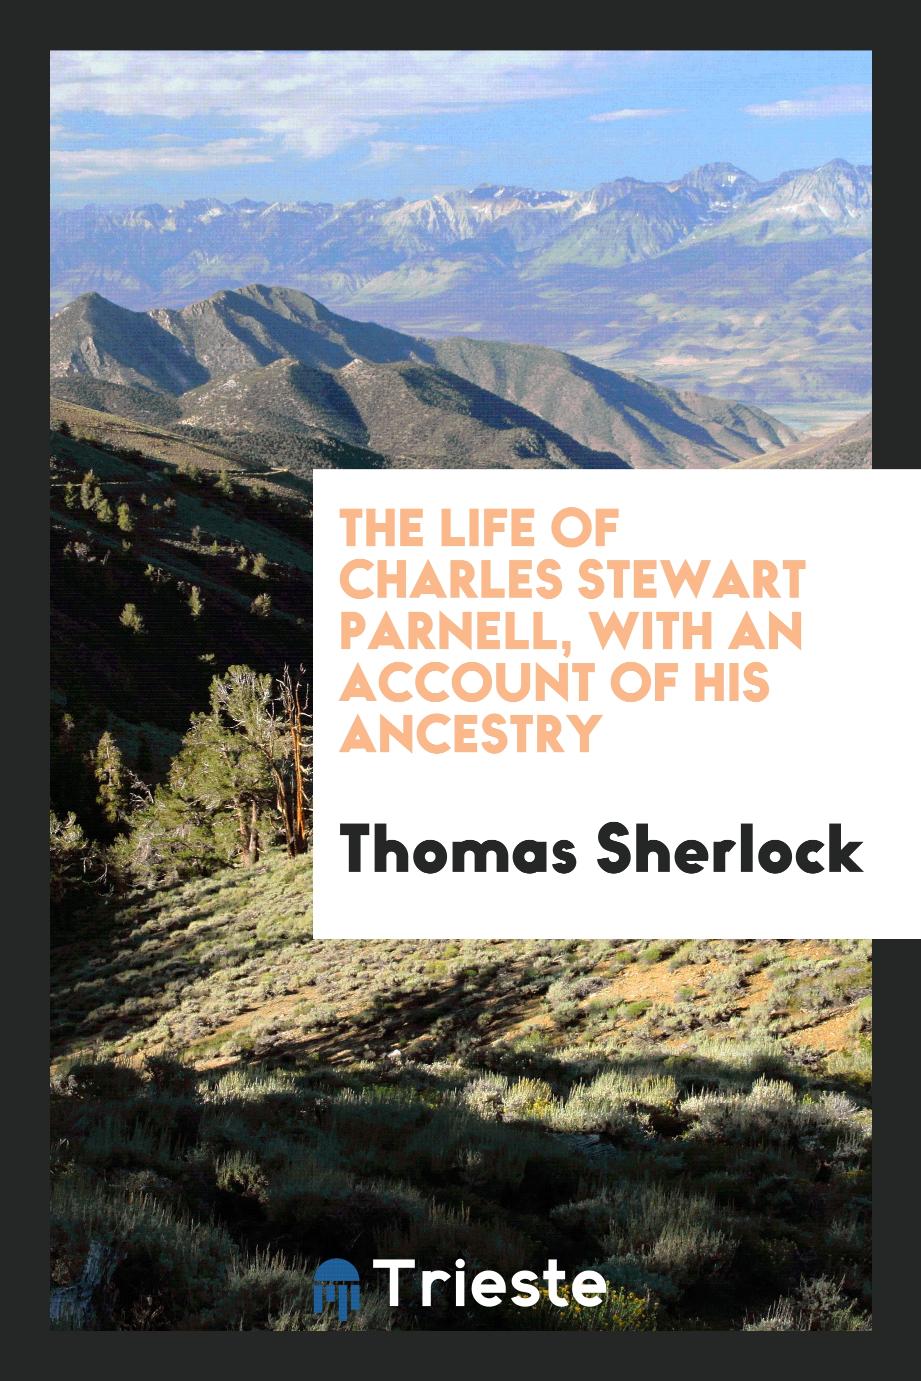 The Life of Charles Stewart Parnell, with an Account of His Ancestry